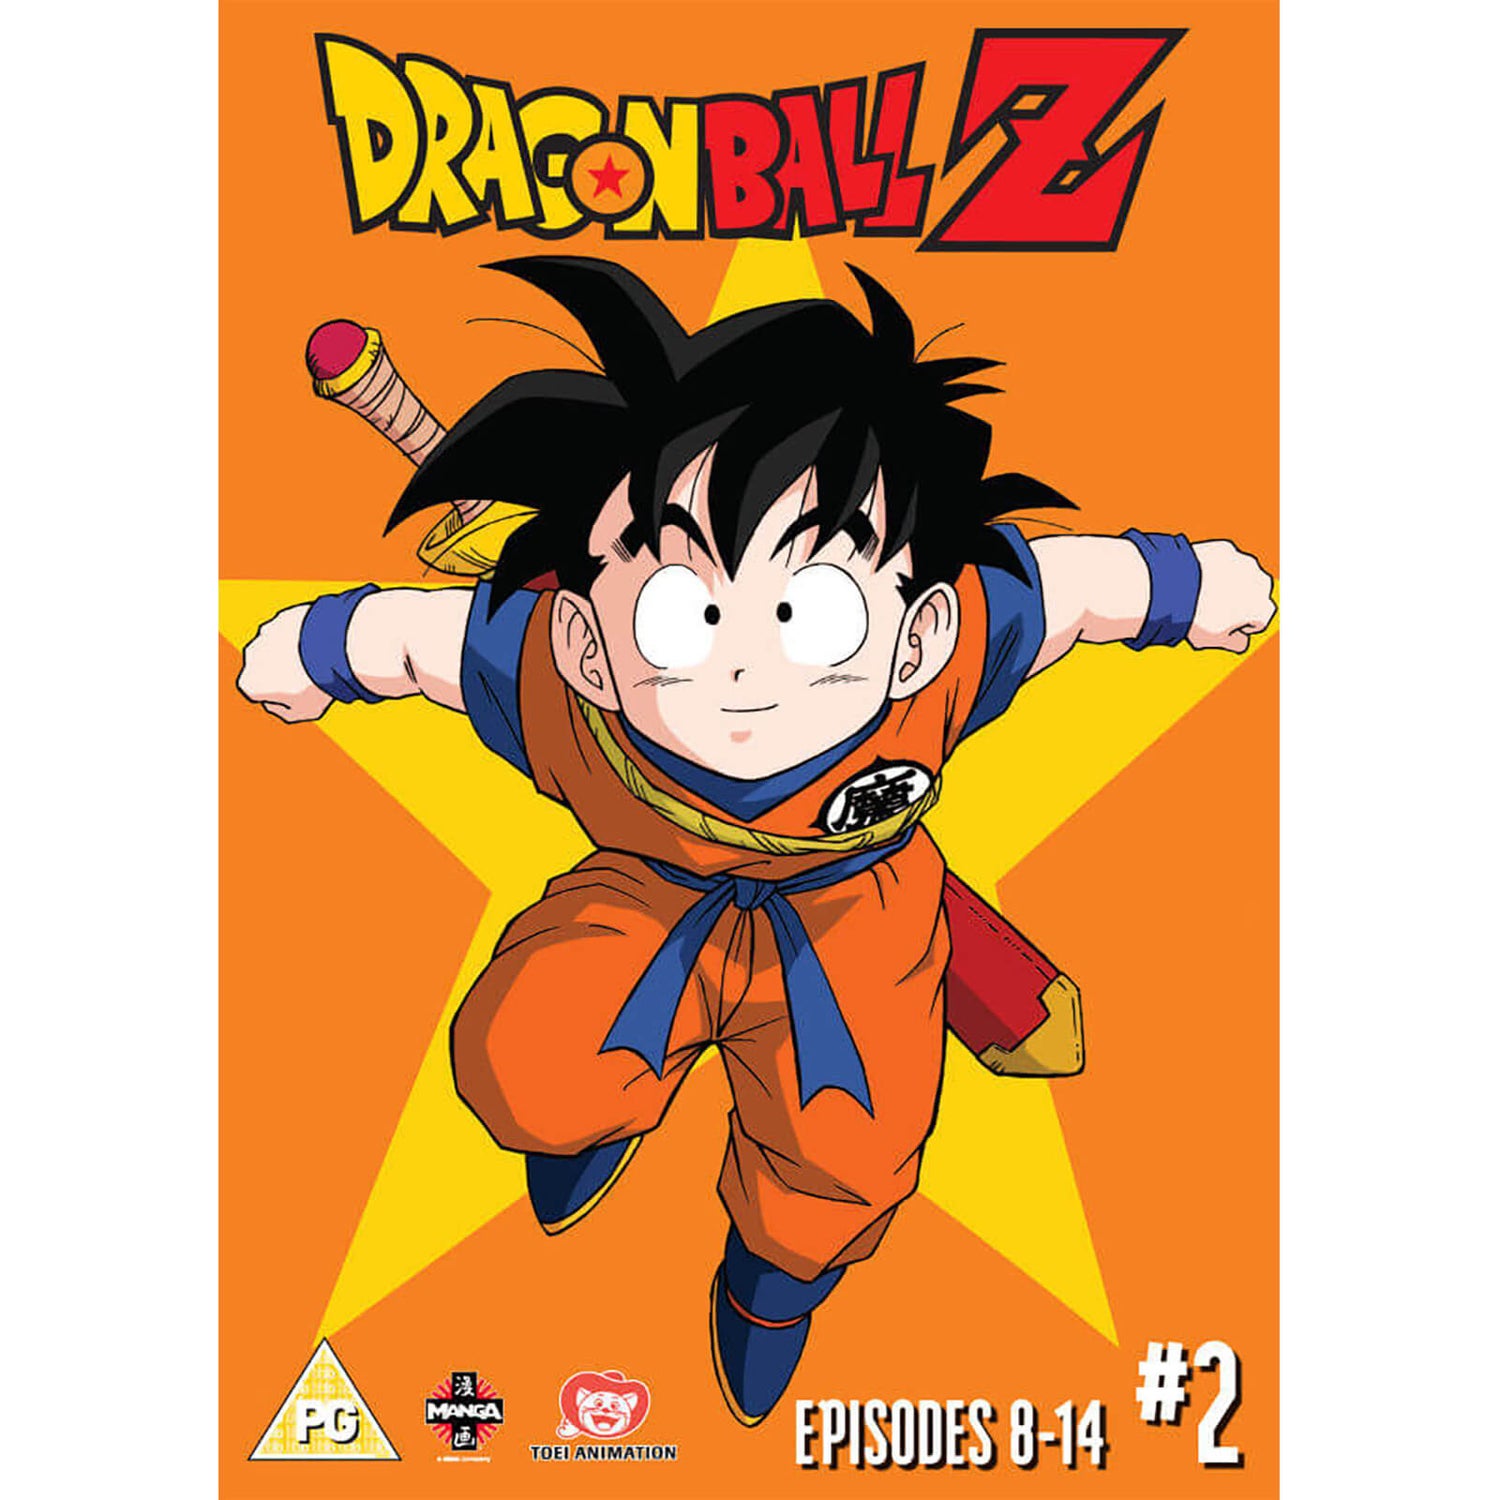 connie kammerer recommends dragonball season 1 episode 1 pic